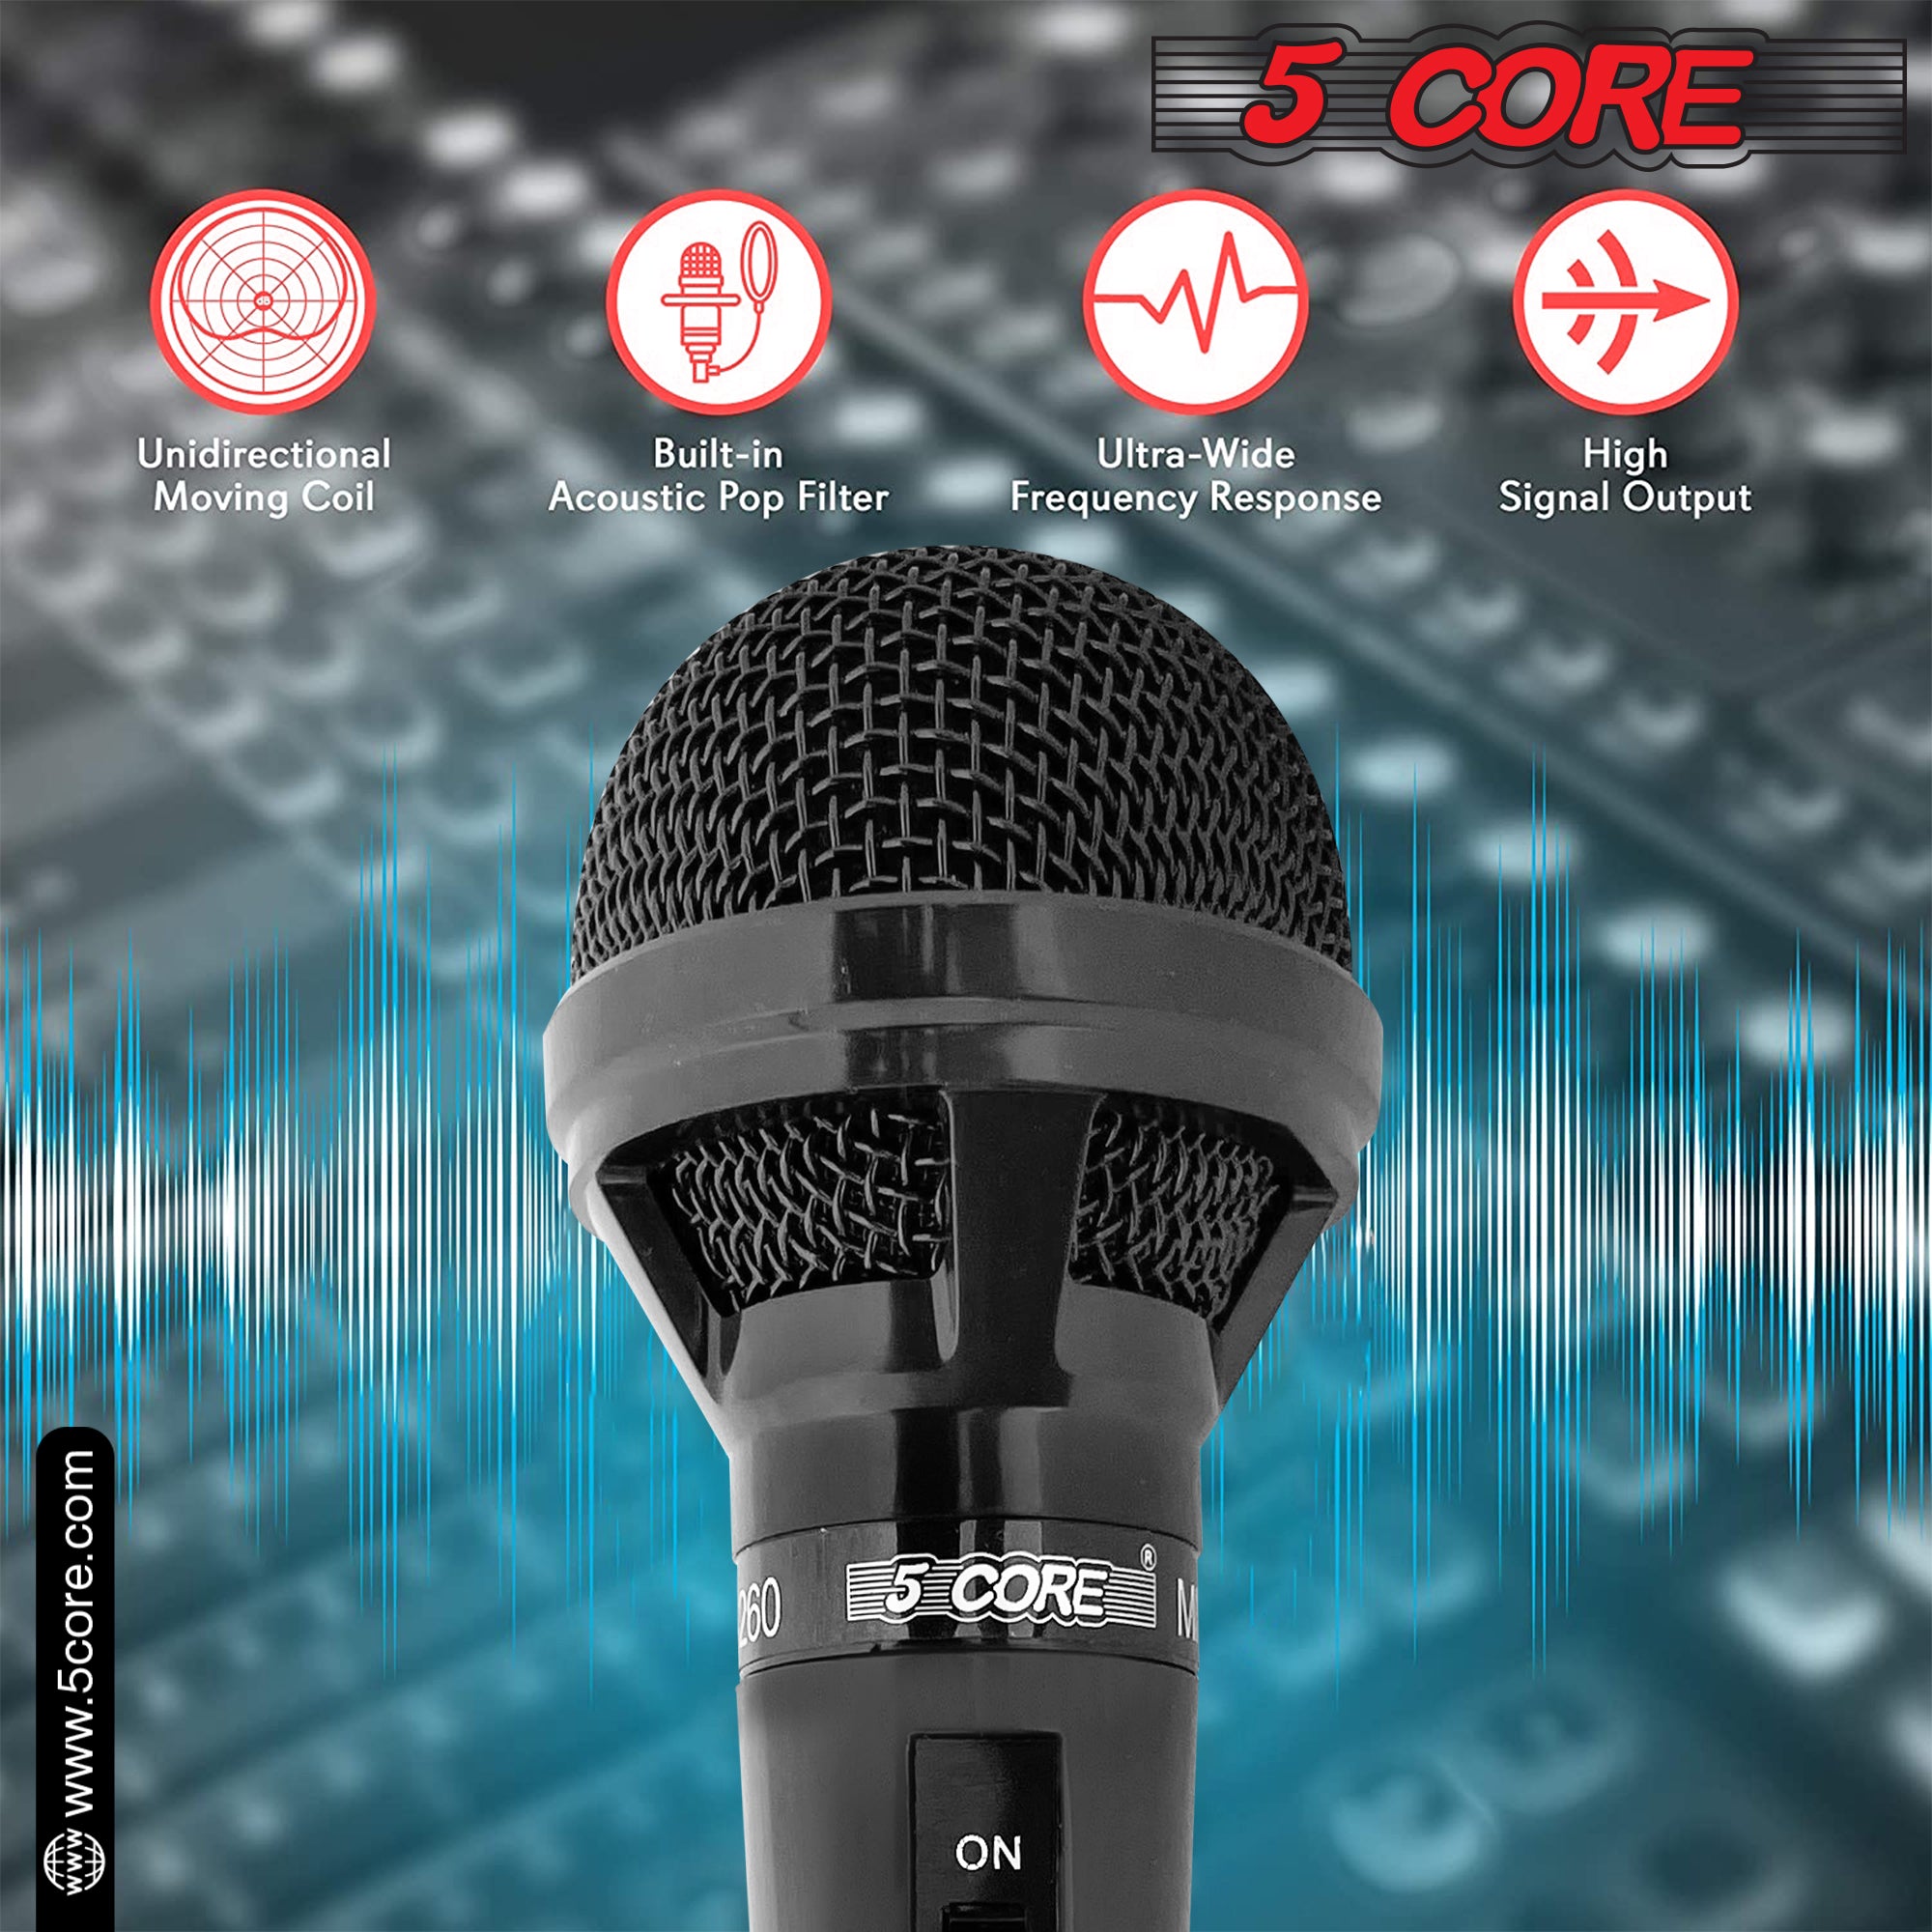 Designed for Singers: Cardioid Pattern Reduces Background Noise